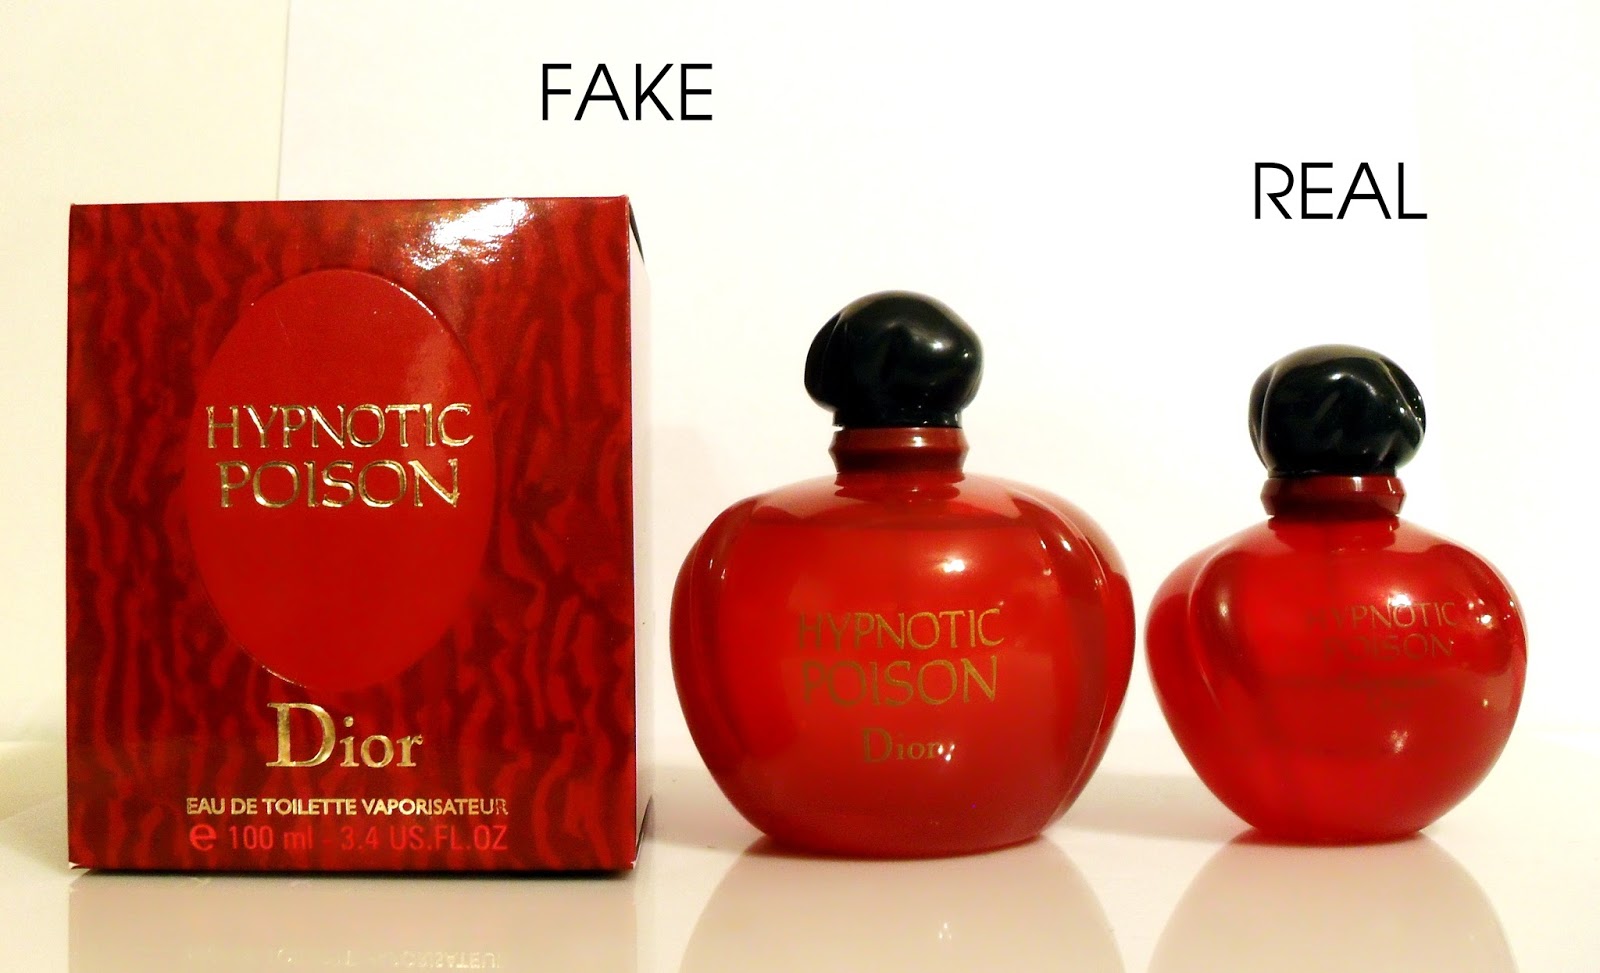 Dior Pure Poison Inspired Luxe Perfume - Pure Amour – Fragrenza